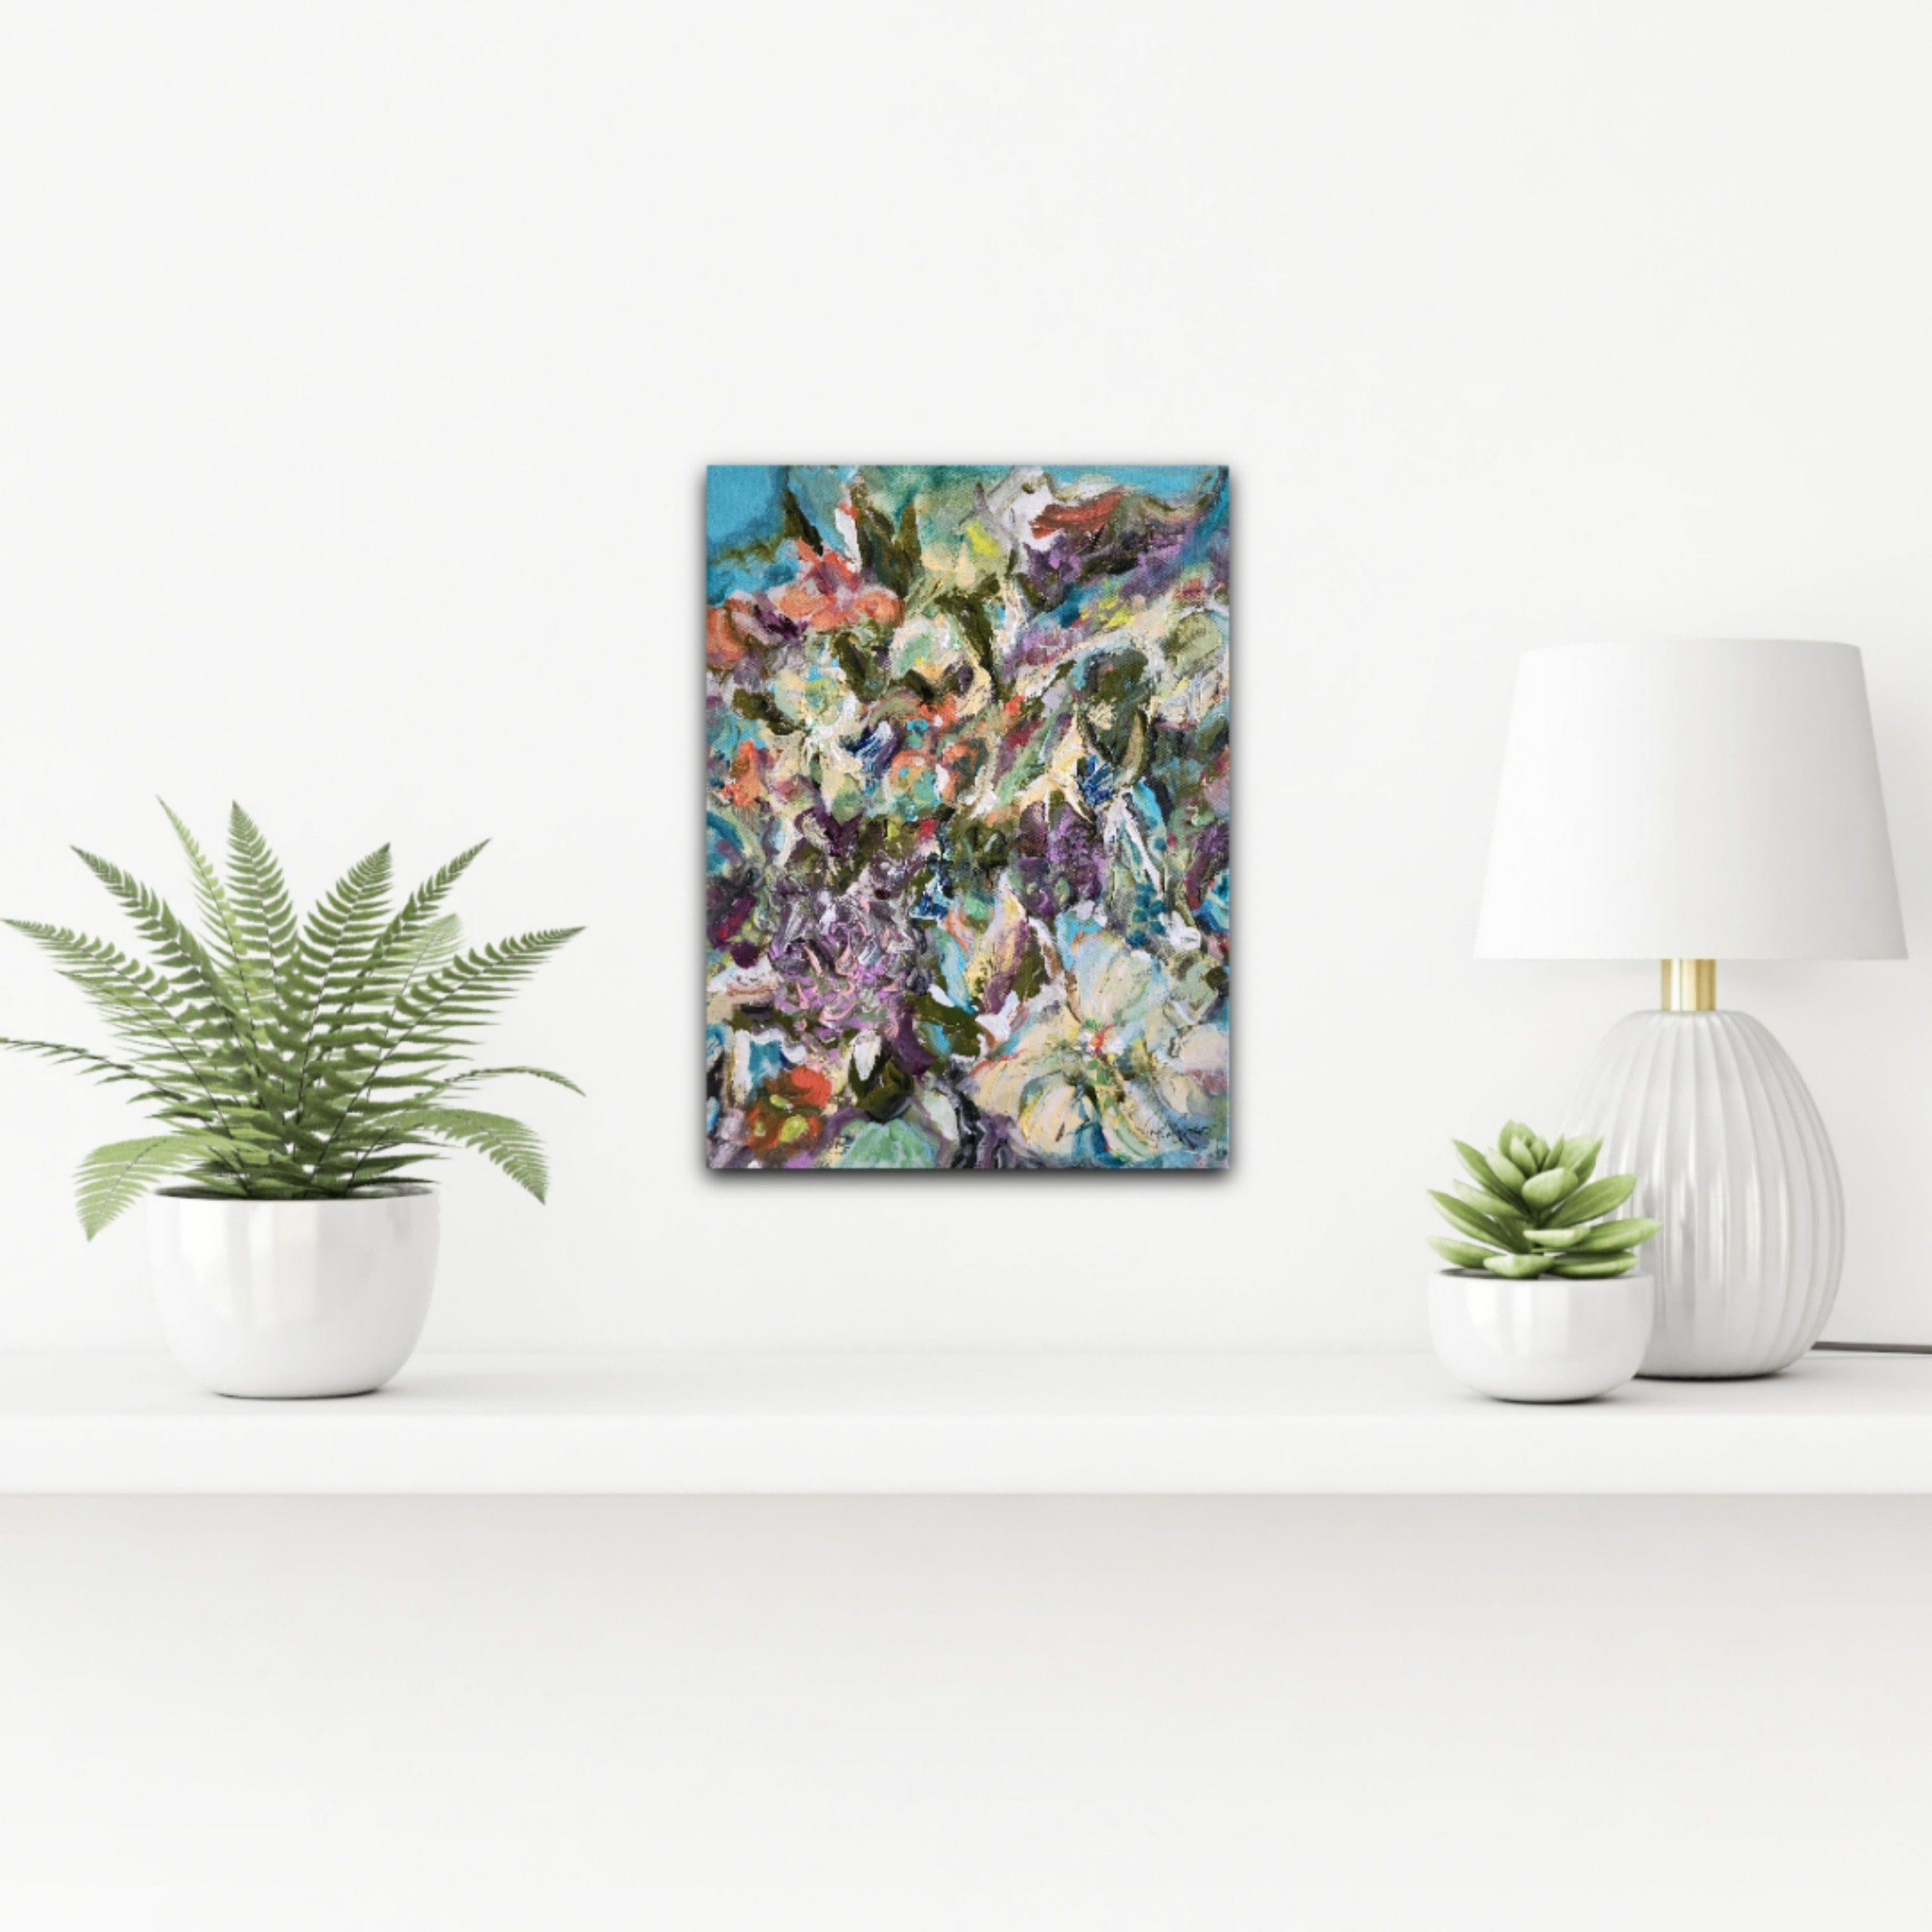 The artist is Crazy about flowers, abstract art, and nature. This fun, colorful barrage of flowers, leaves, and sky with thick impasto paint was created with love and joy. It brings motion, color, spontaneity and botanicals into your home or office.